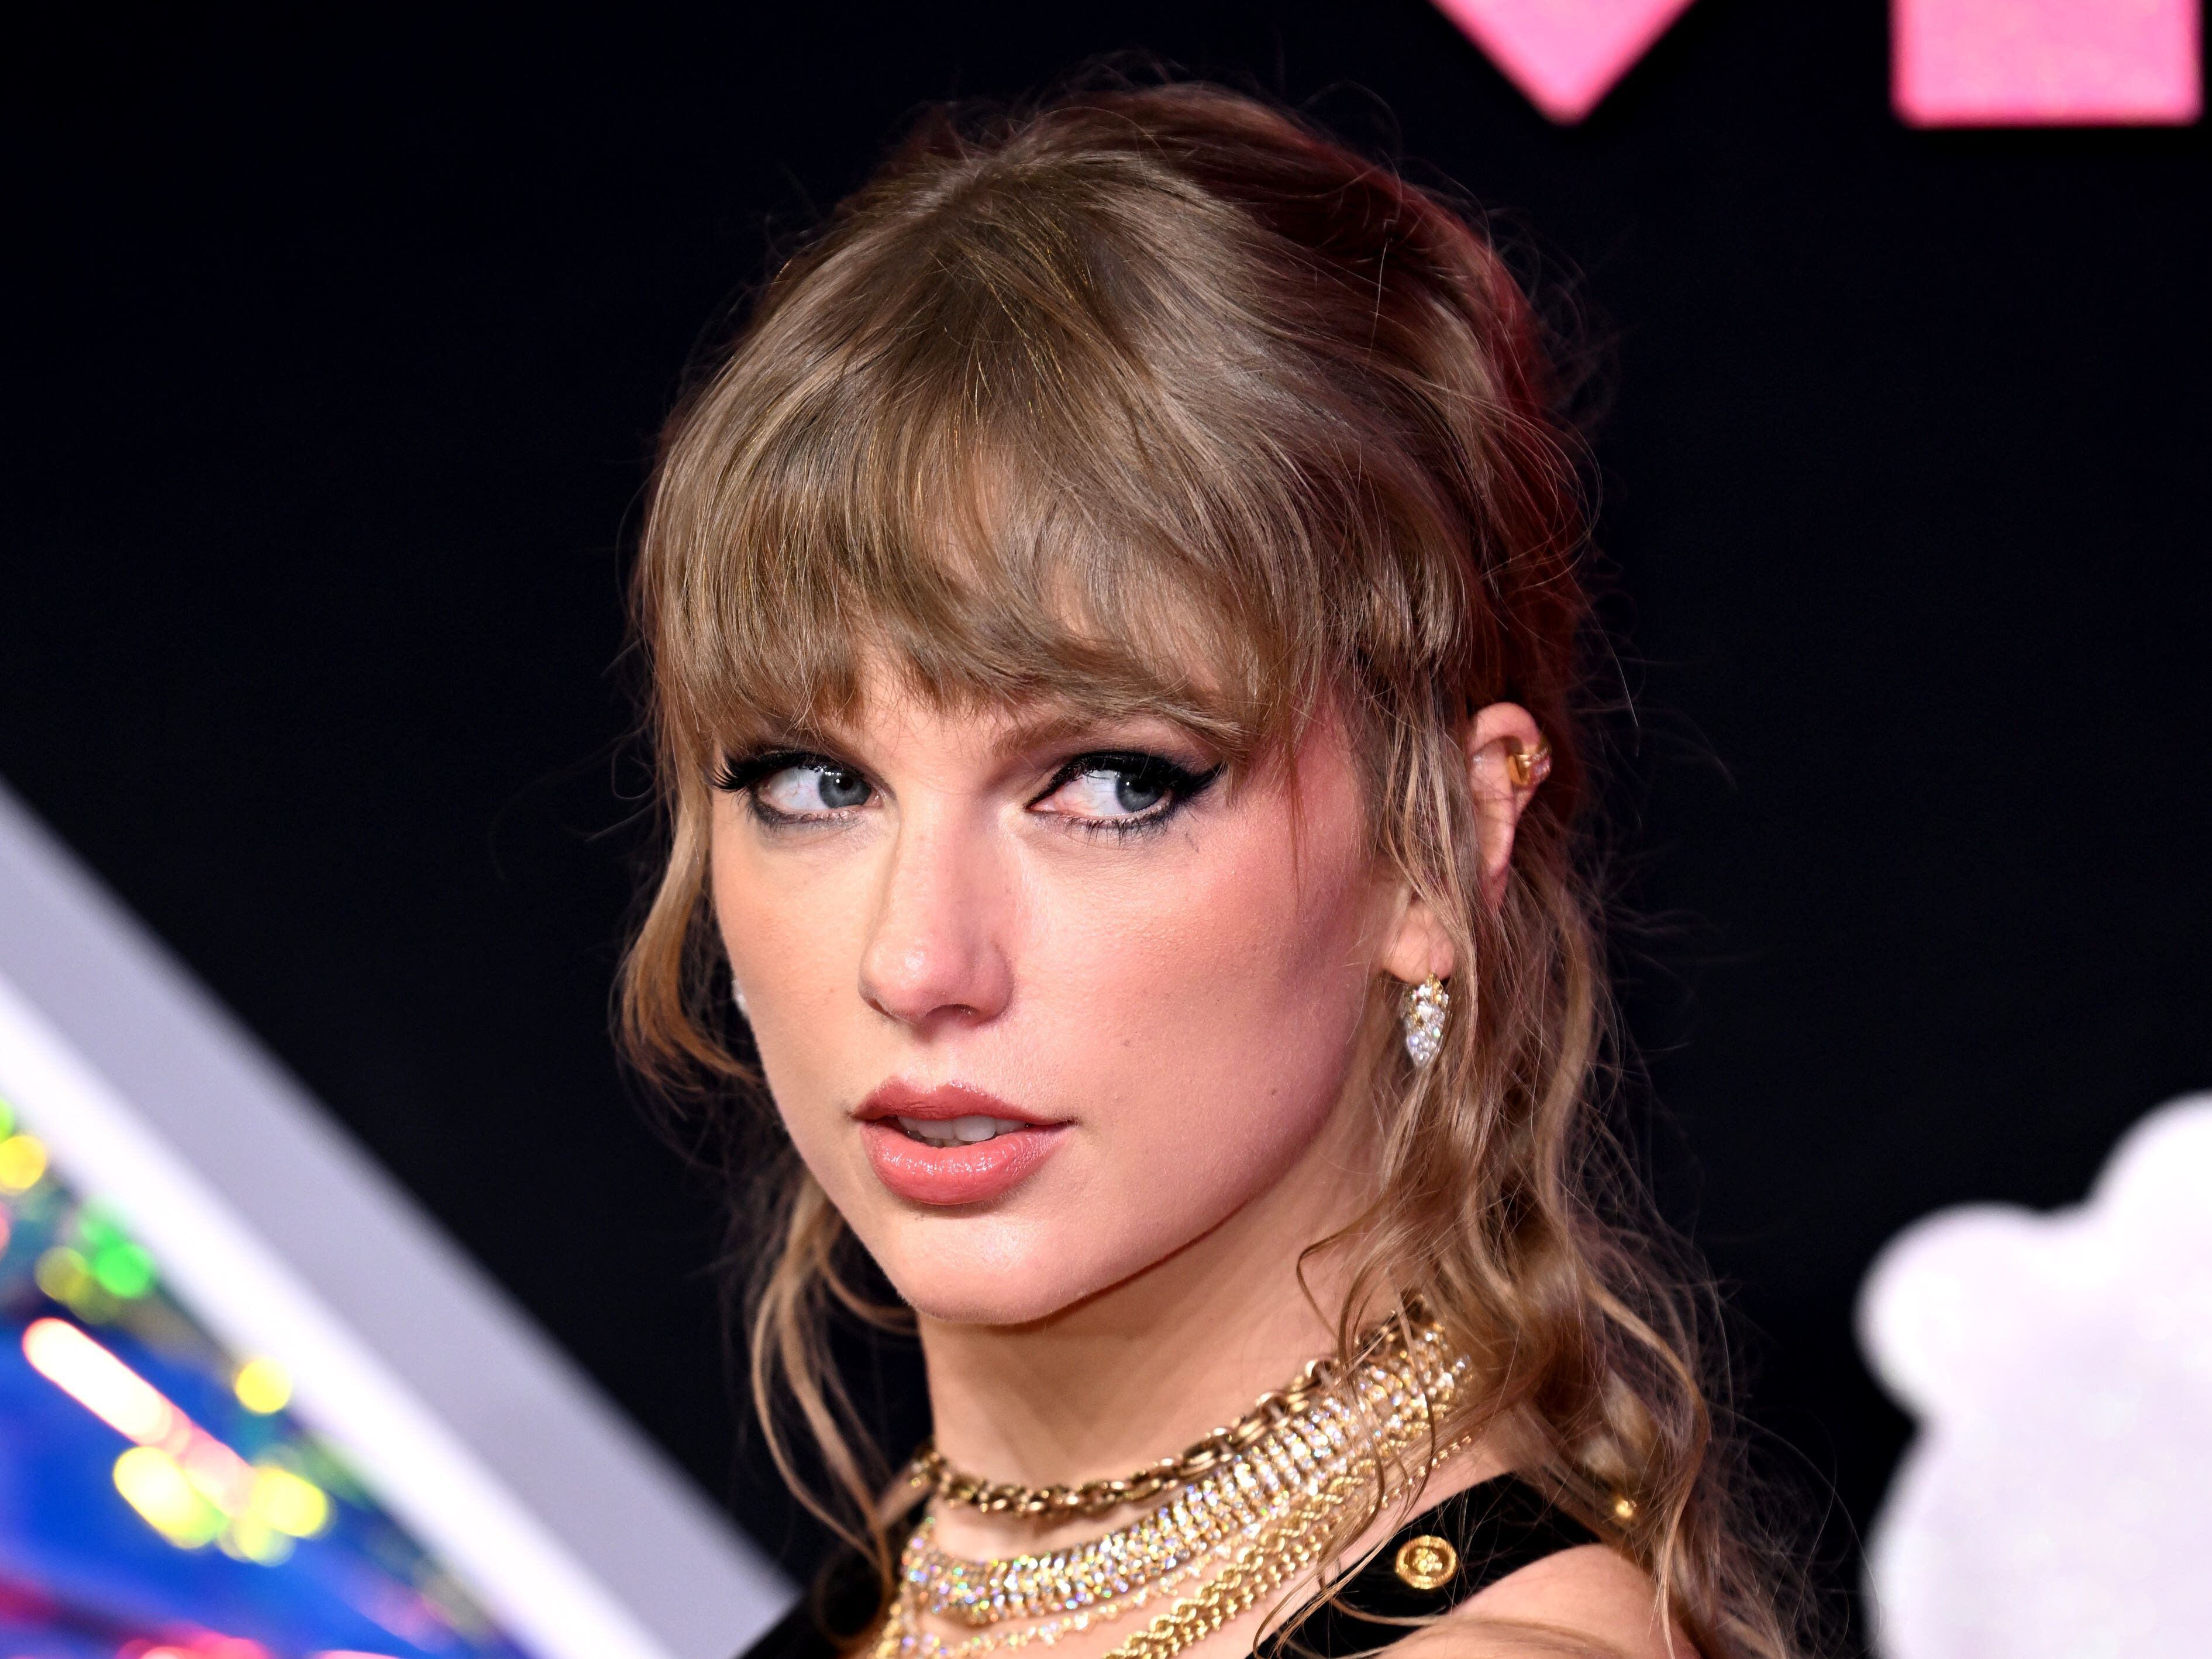 Taylor Swift named Spotify’s most streamed artist for 2023